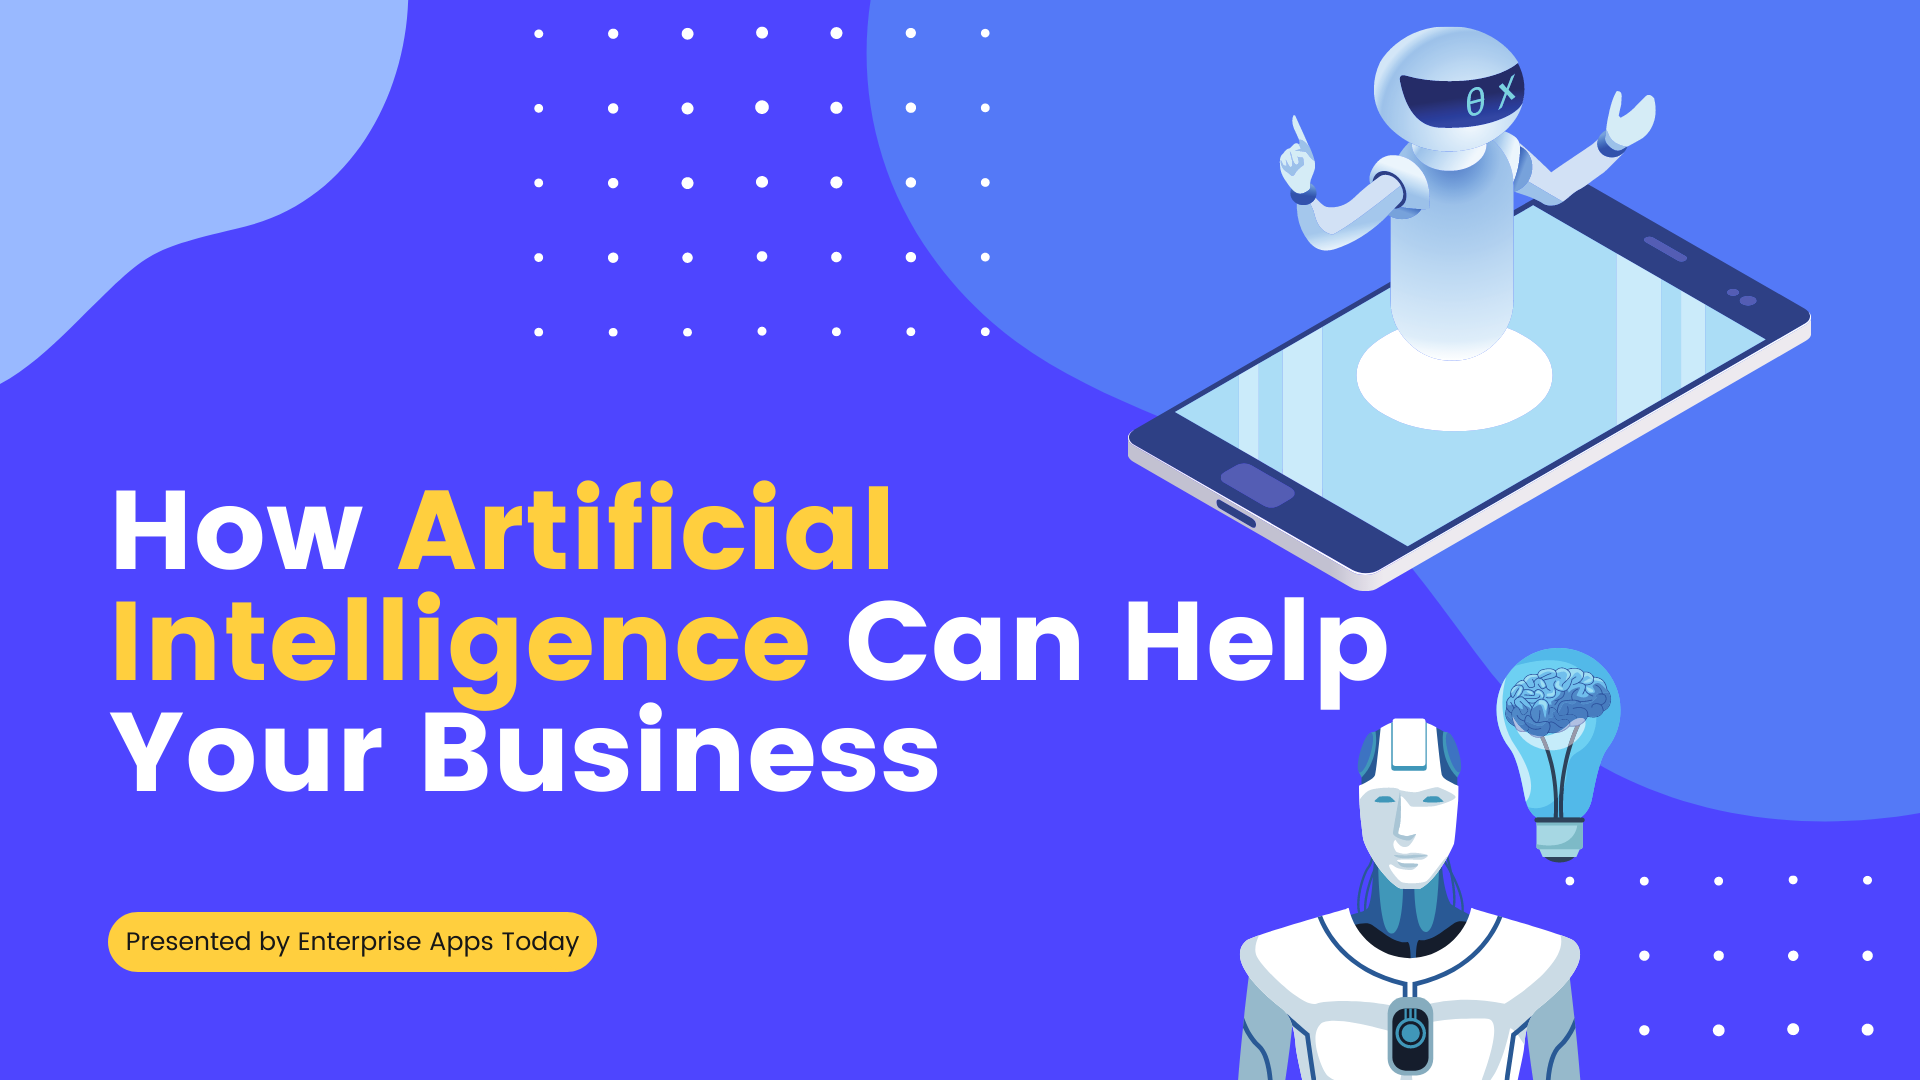 How Artificial Intelligence Can Help Your Business in 2022